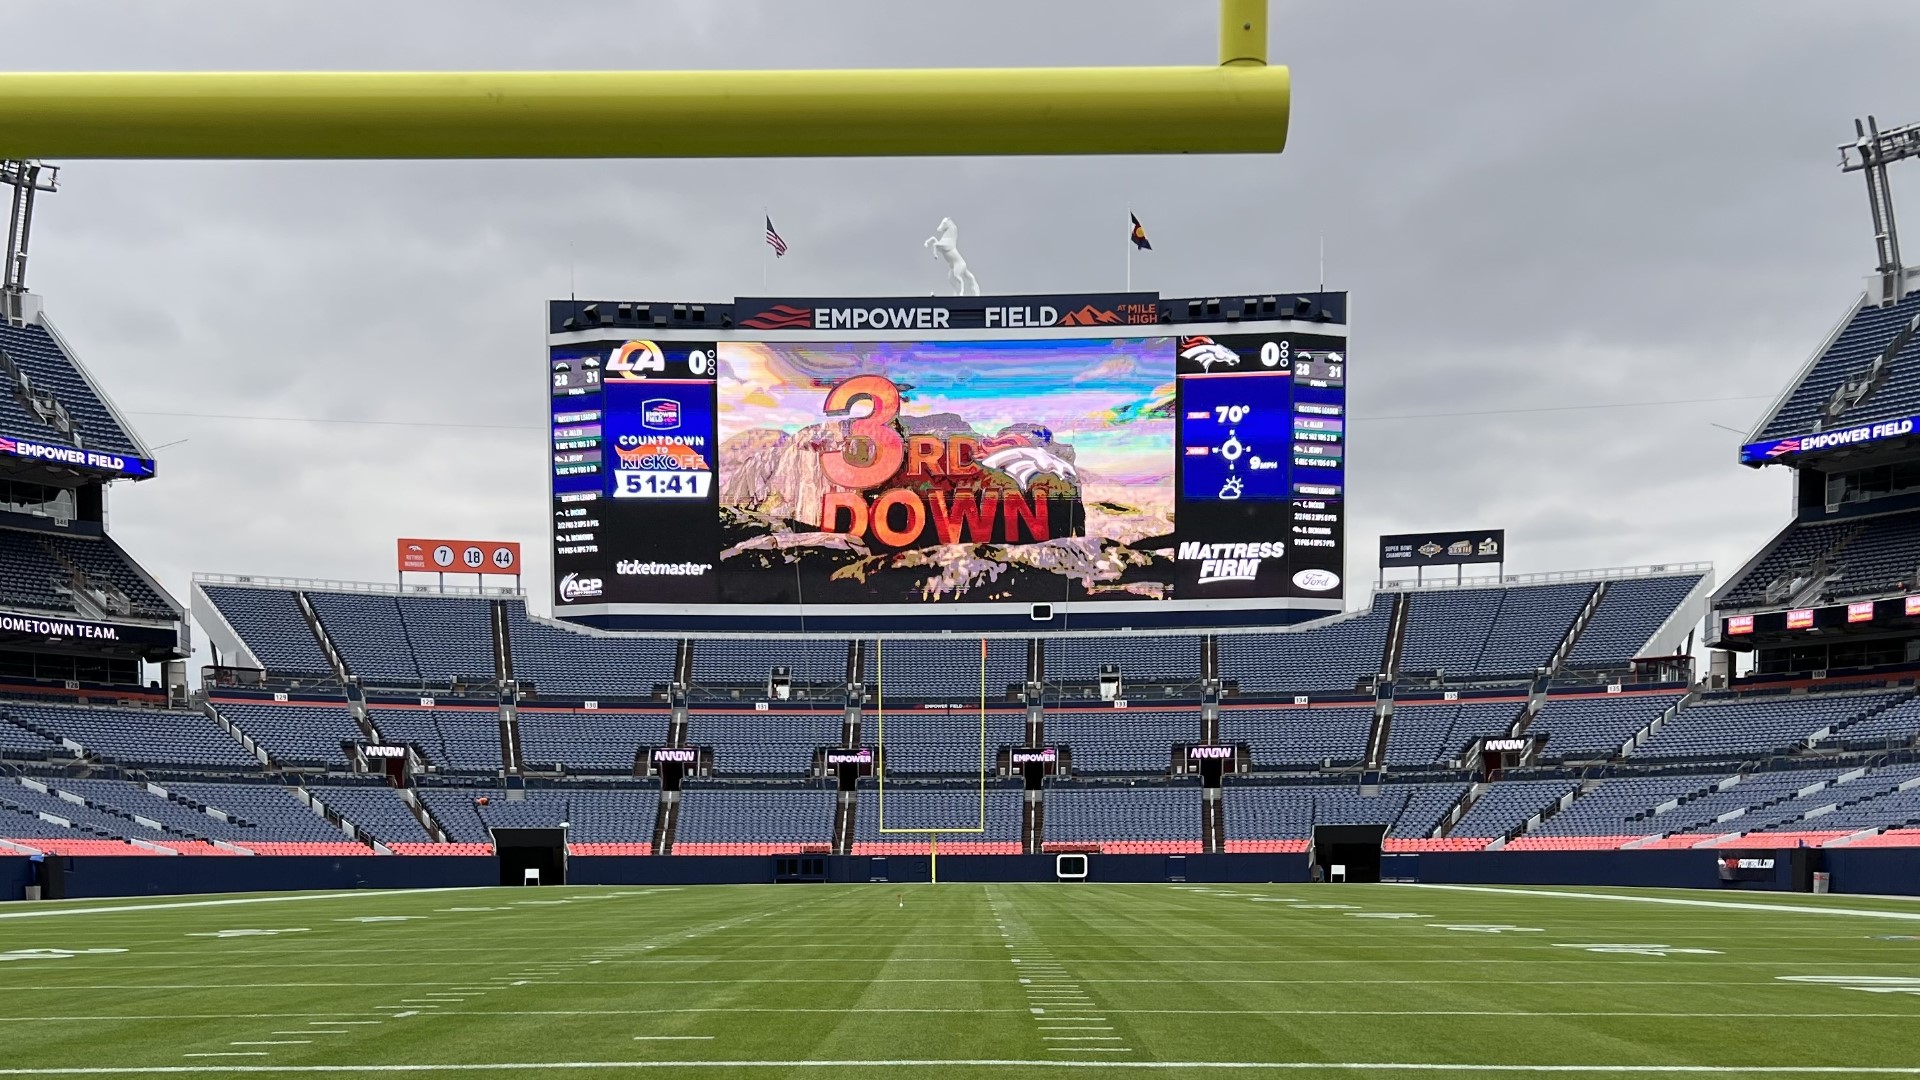 Broncos fans will get their first taste of the $100 million scoreboard and other upgrades during the home preseason opener vs. the Los Angeles Rams. Watch on 9NEWS.